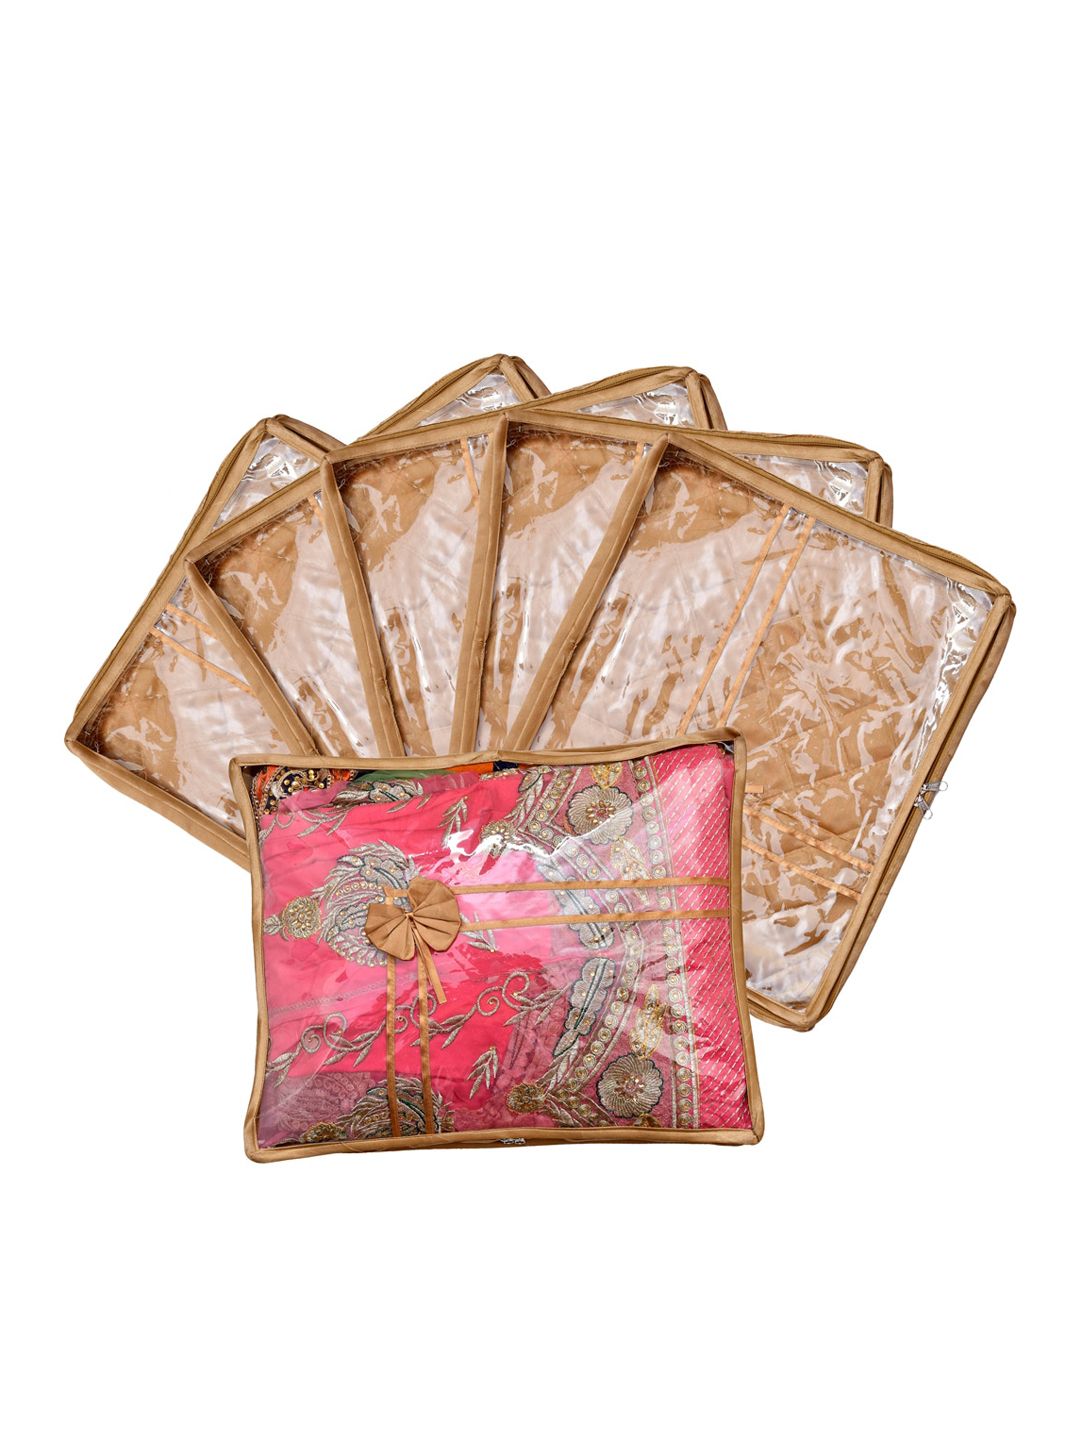 Kuber Industries Set Of 6 Gold-Coloured & Transparent Solid Satin Single Packing Saree Cover Organizers Price in India